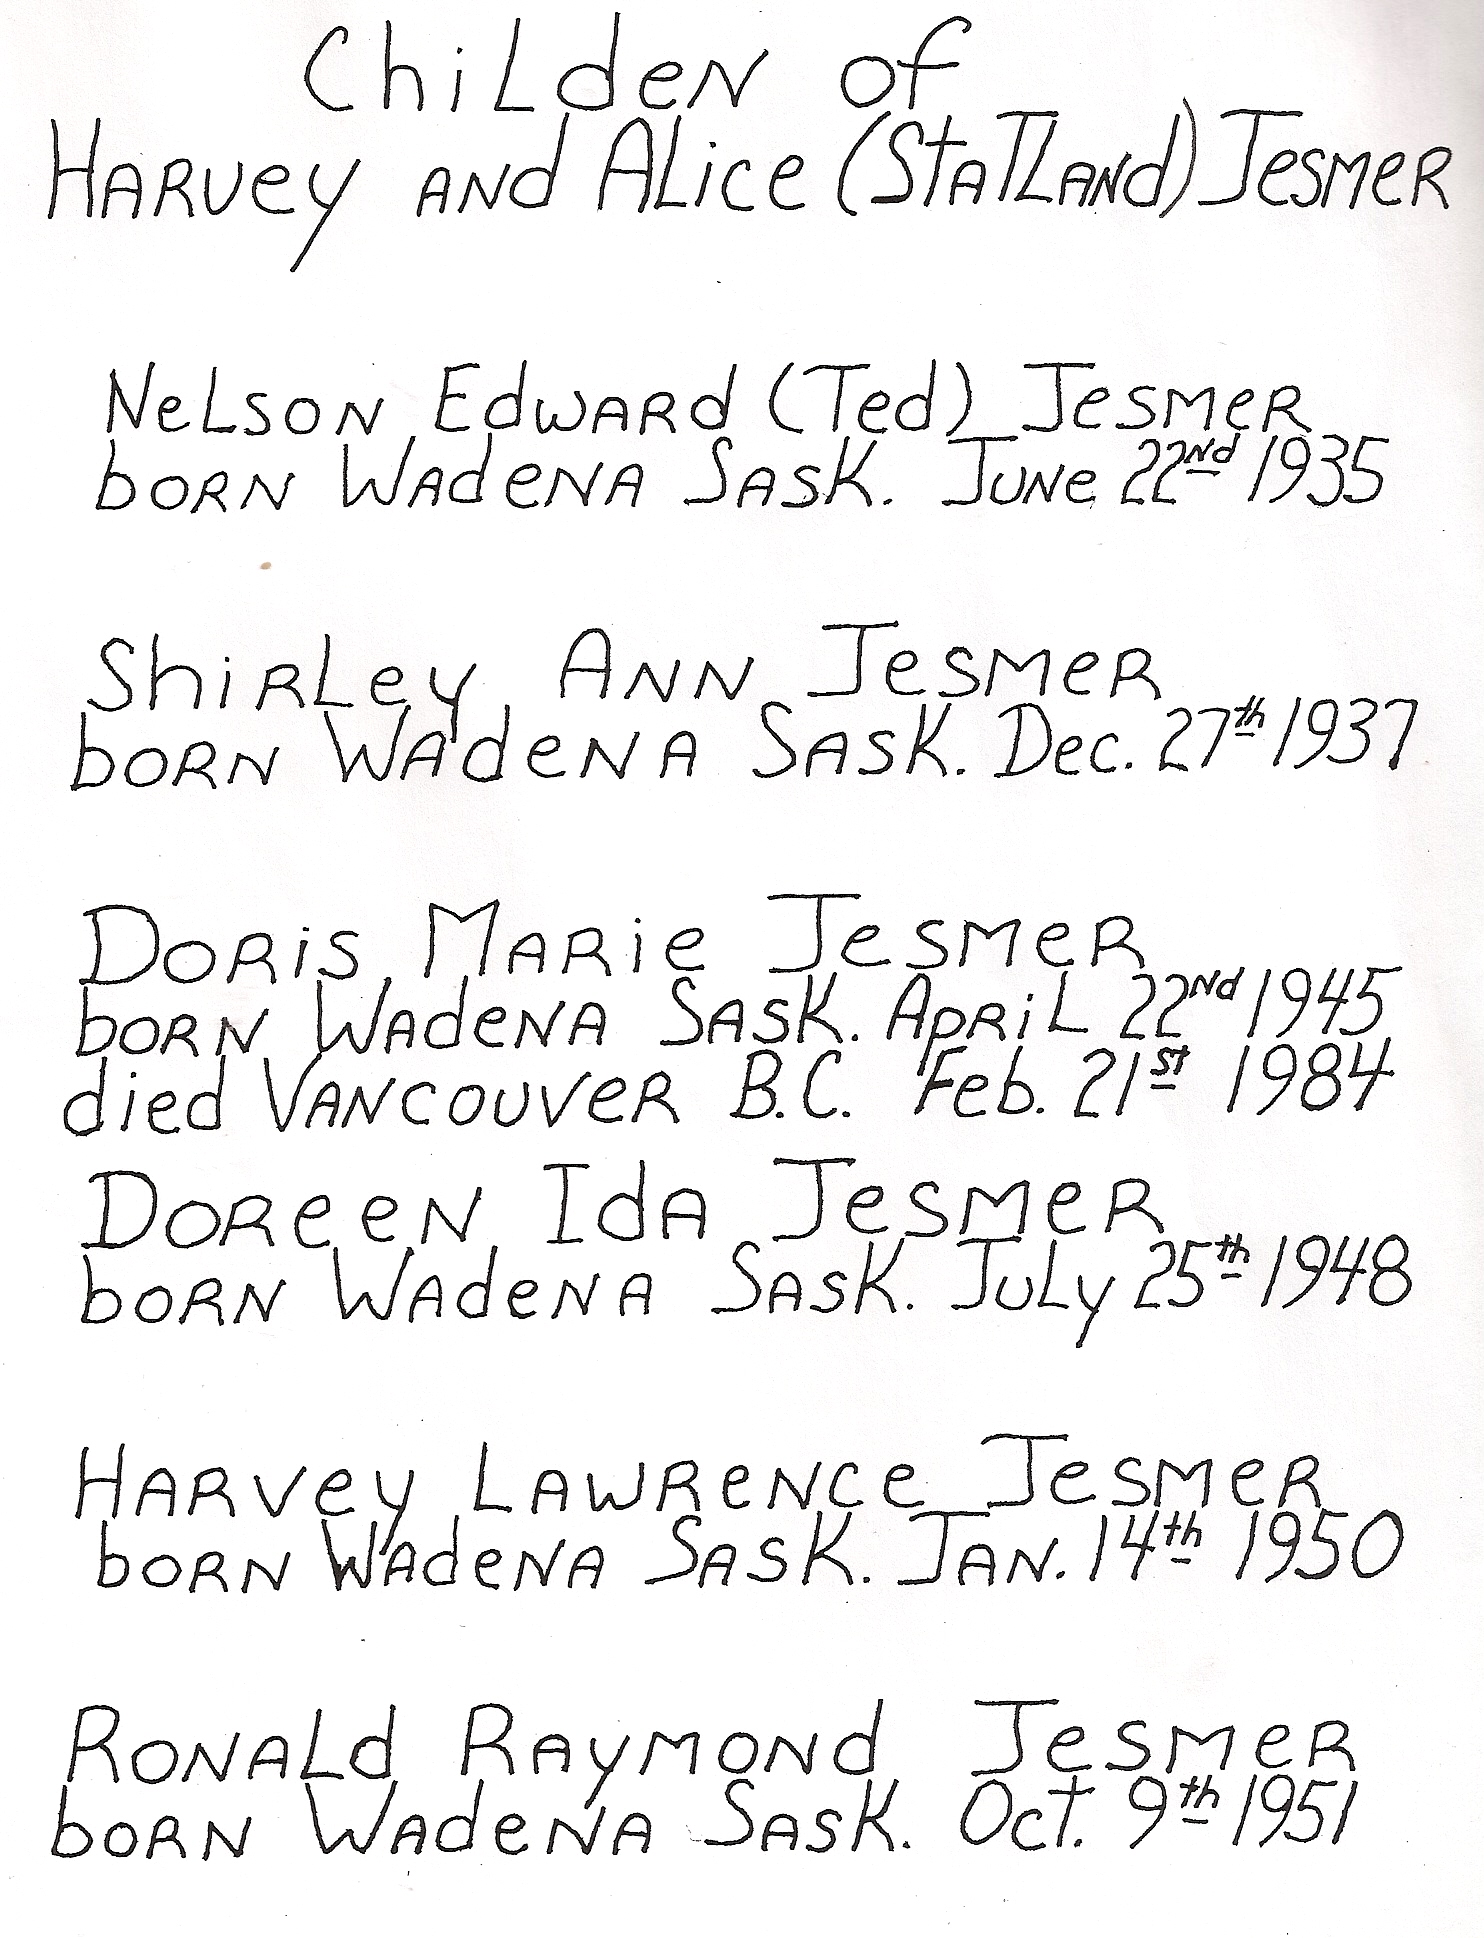 list of Harvey and Alices children